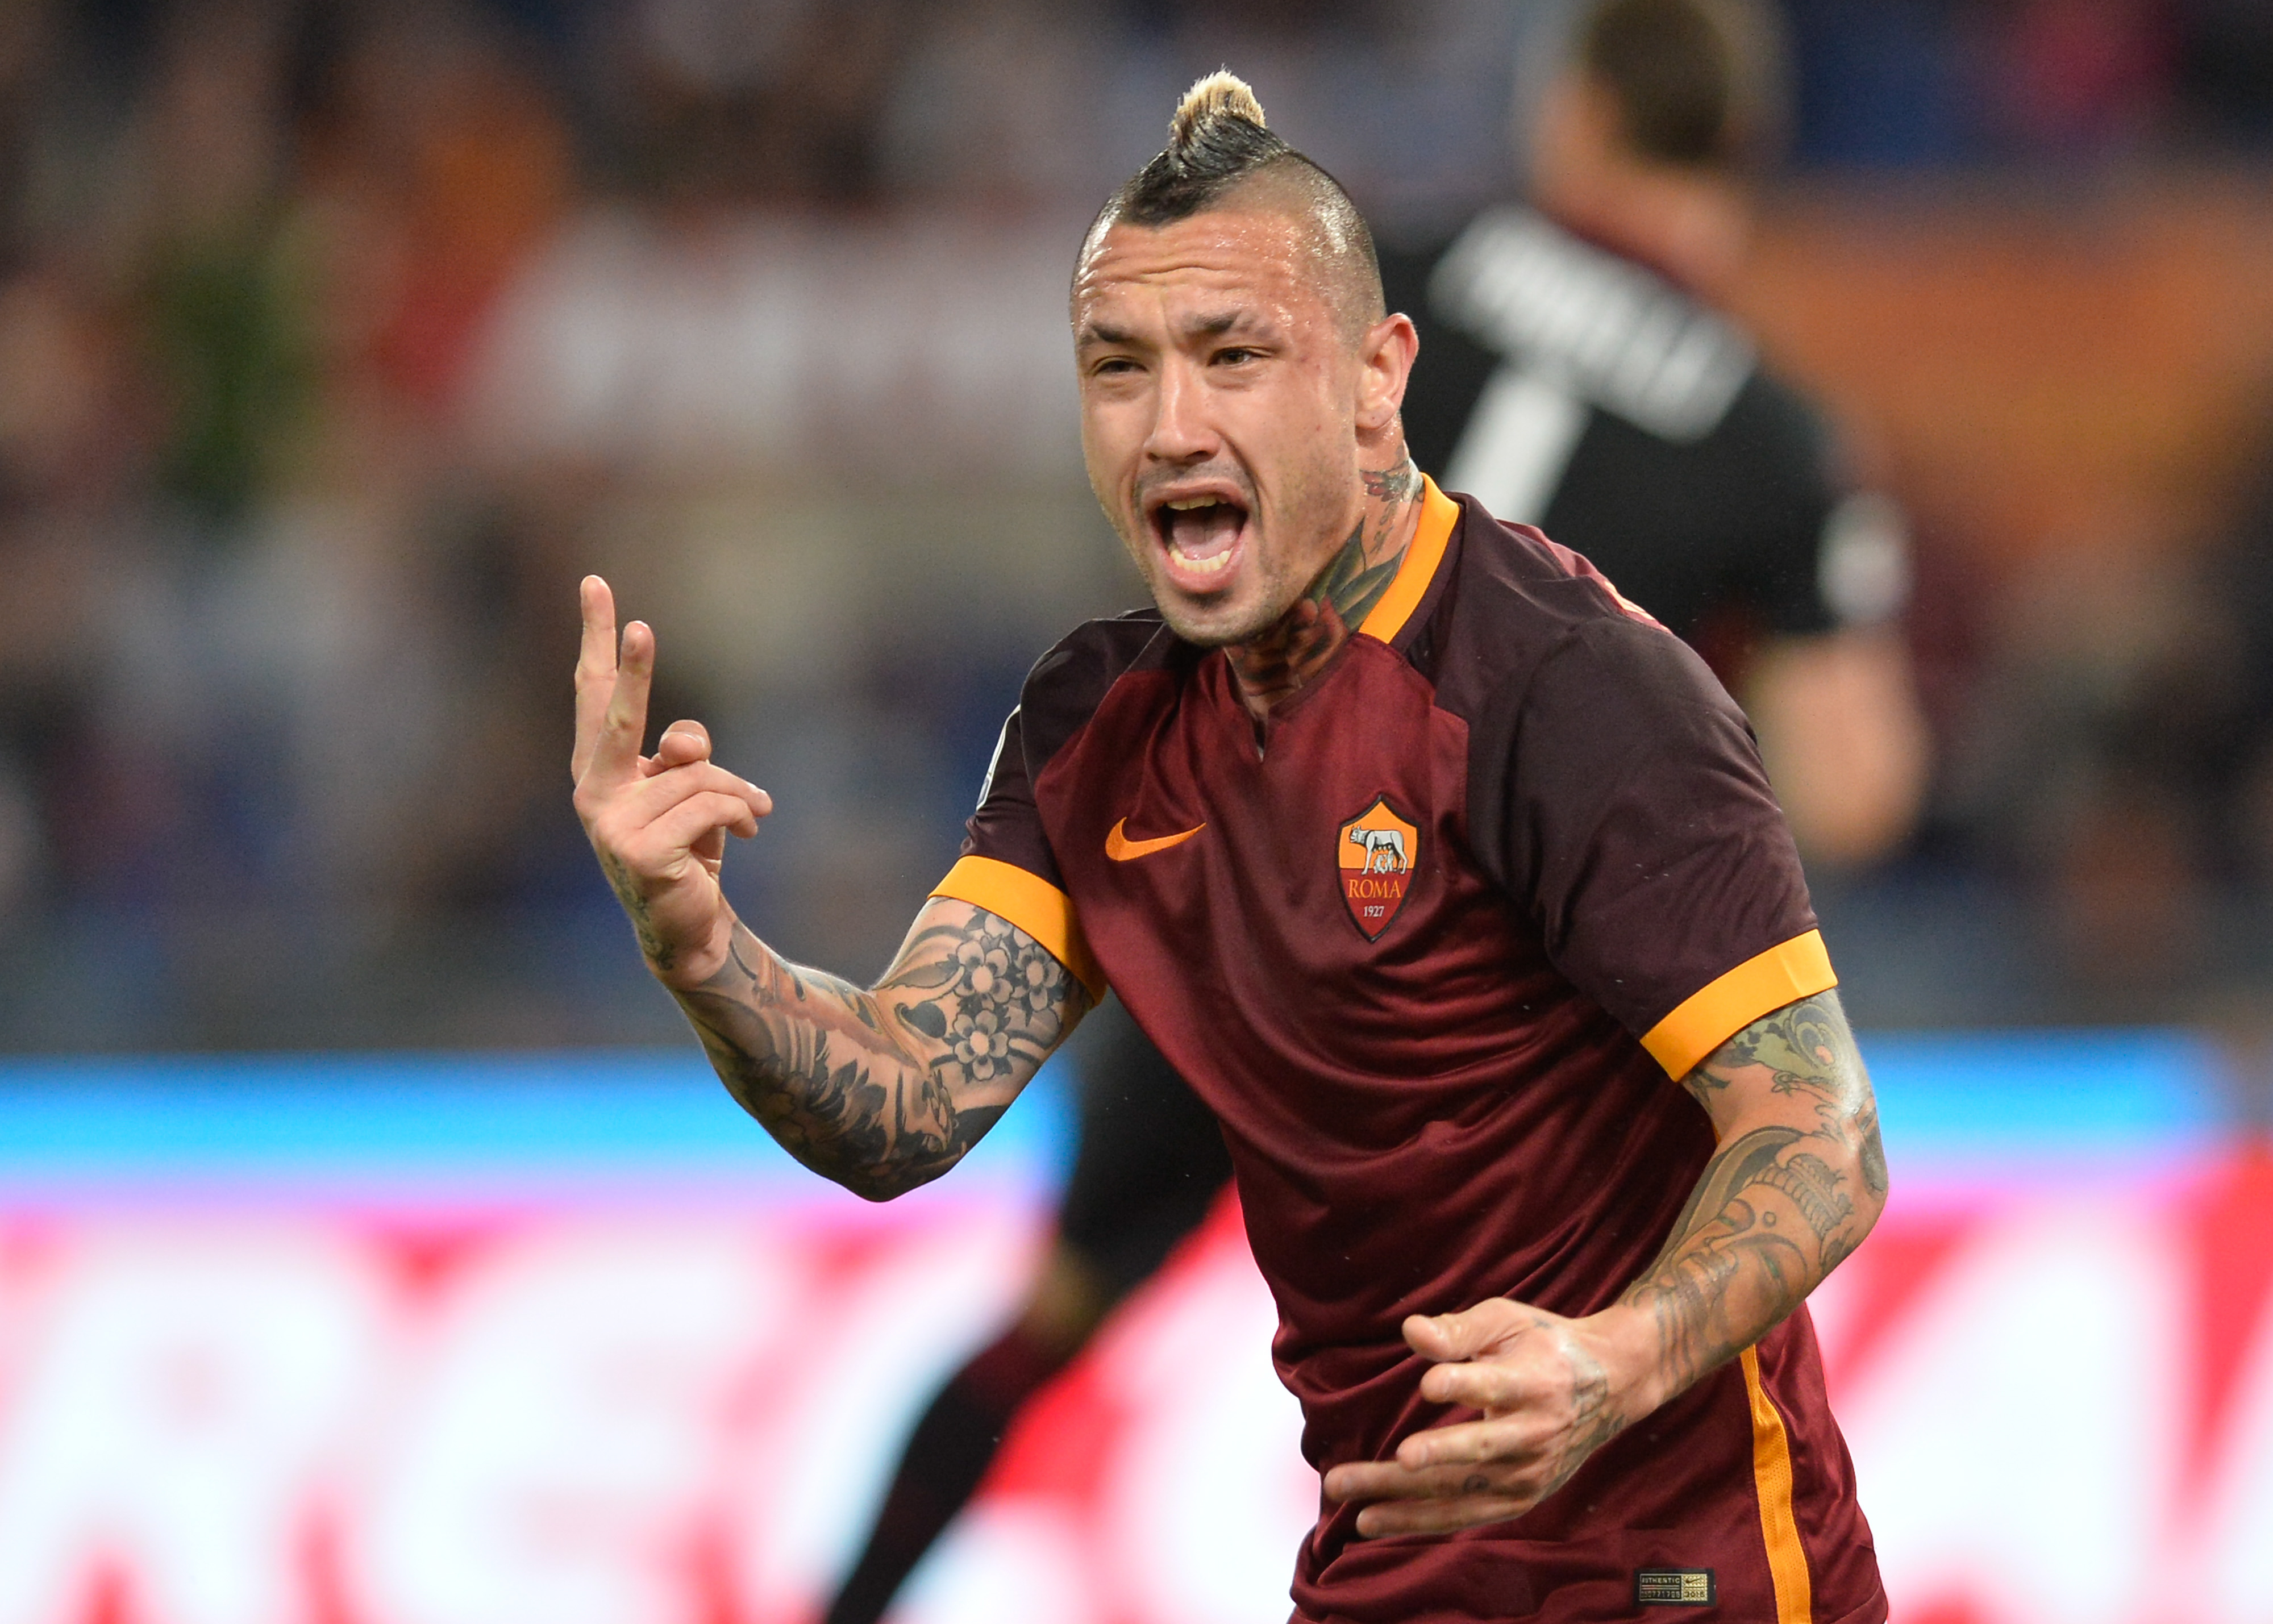 Radja Nainggolan: the latest in a long line of Chelsea FC midfield generals?